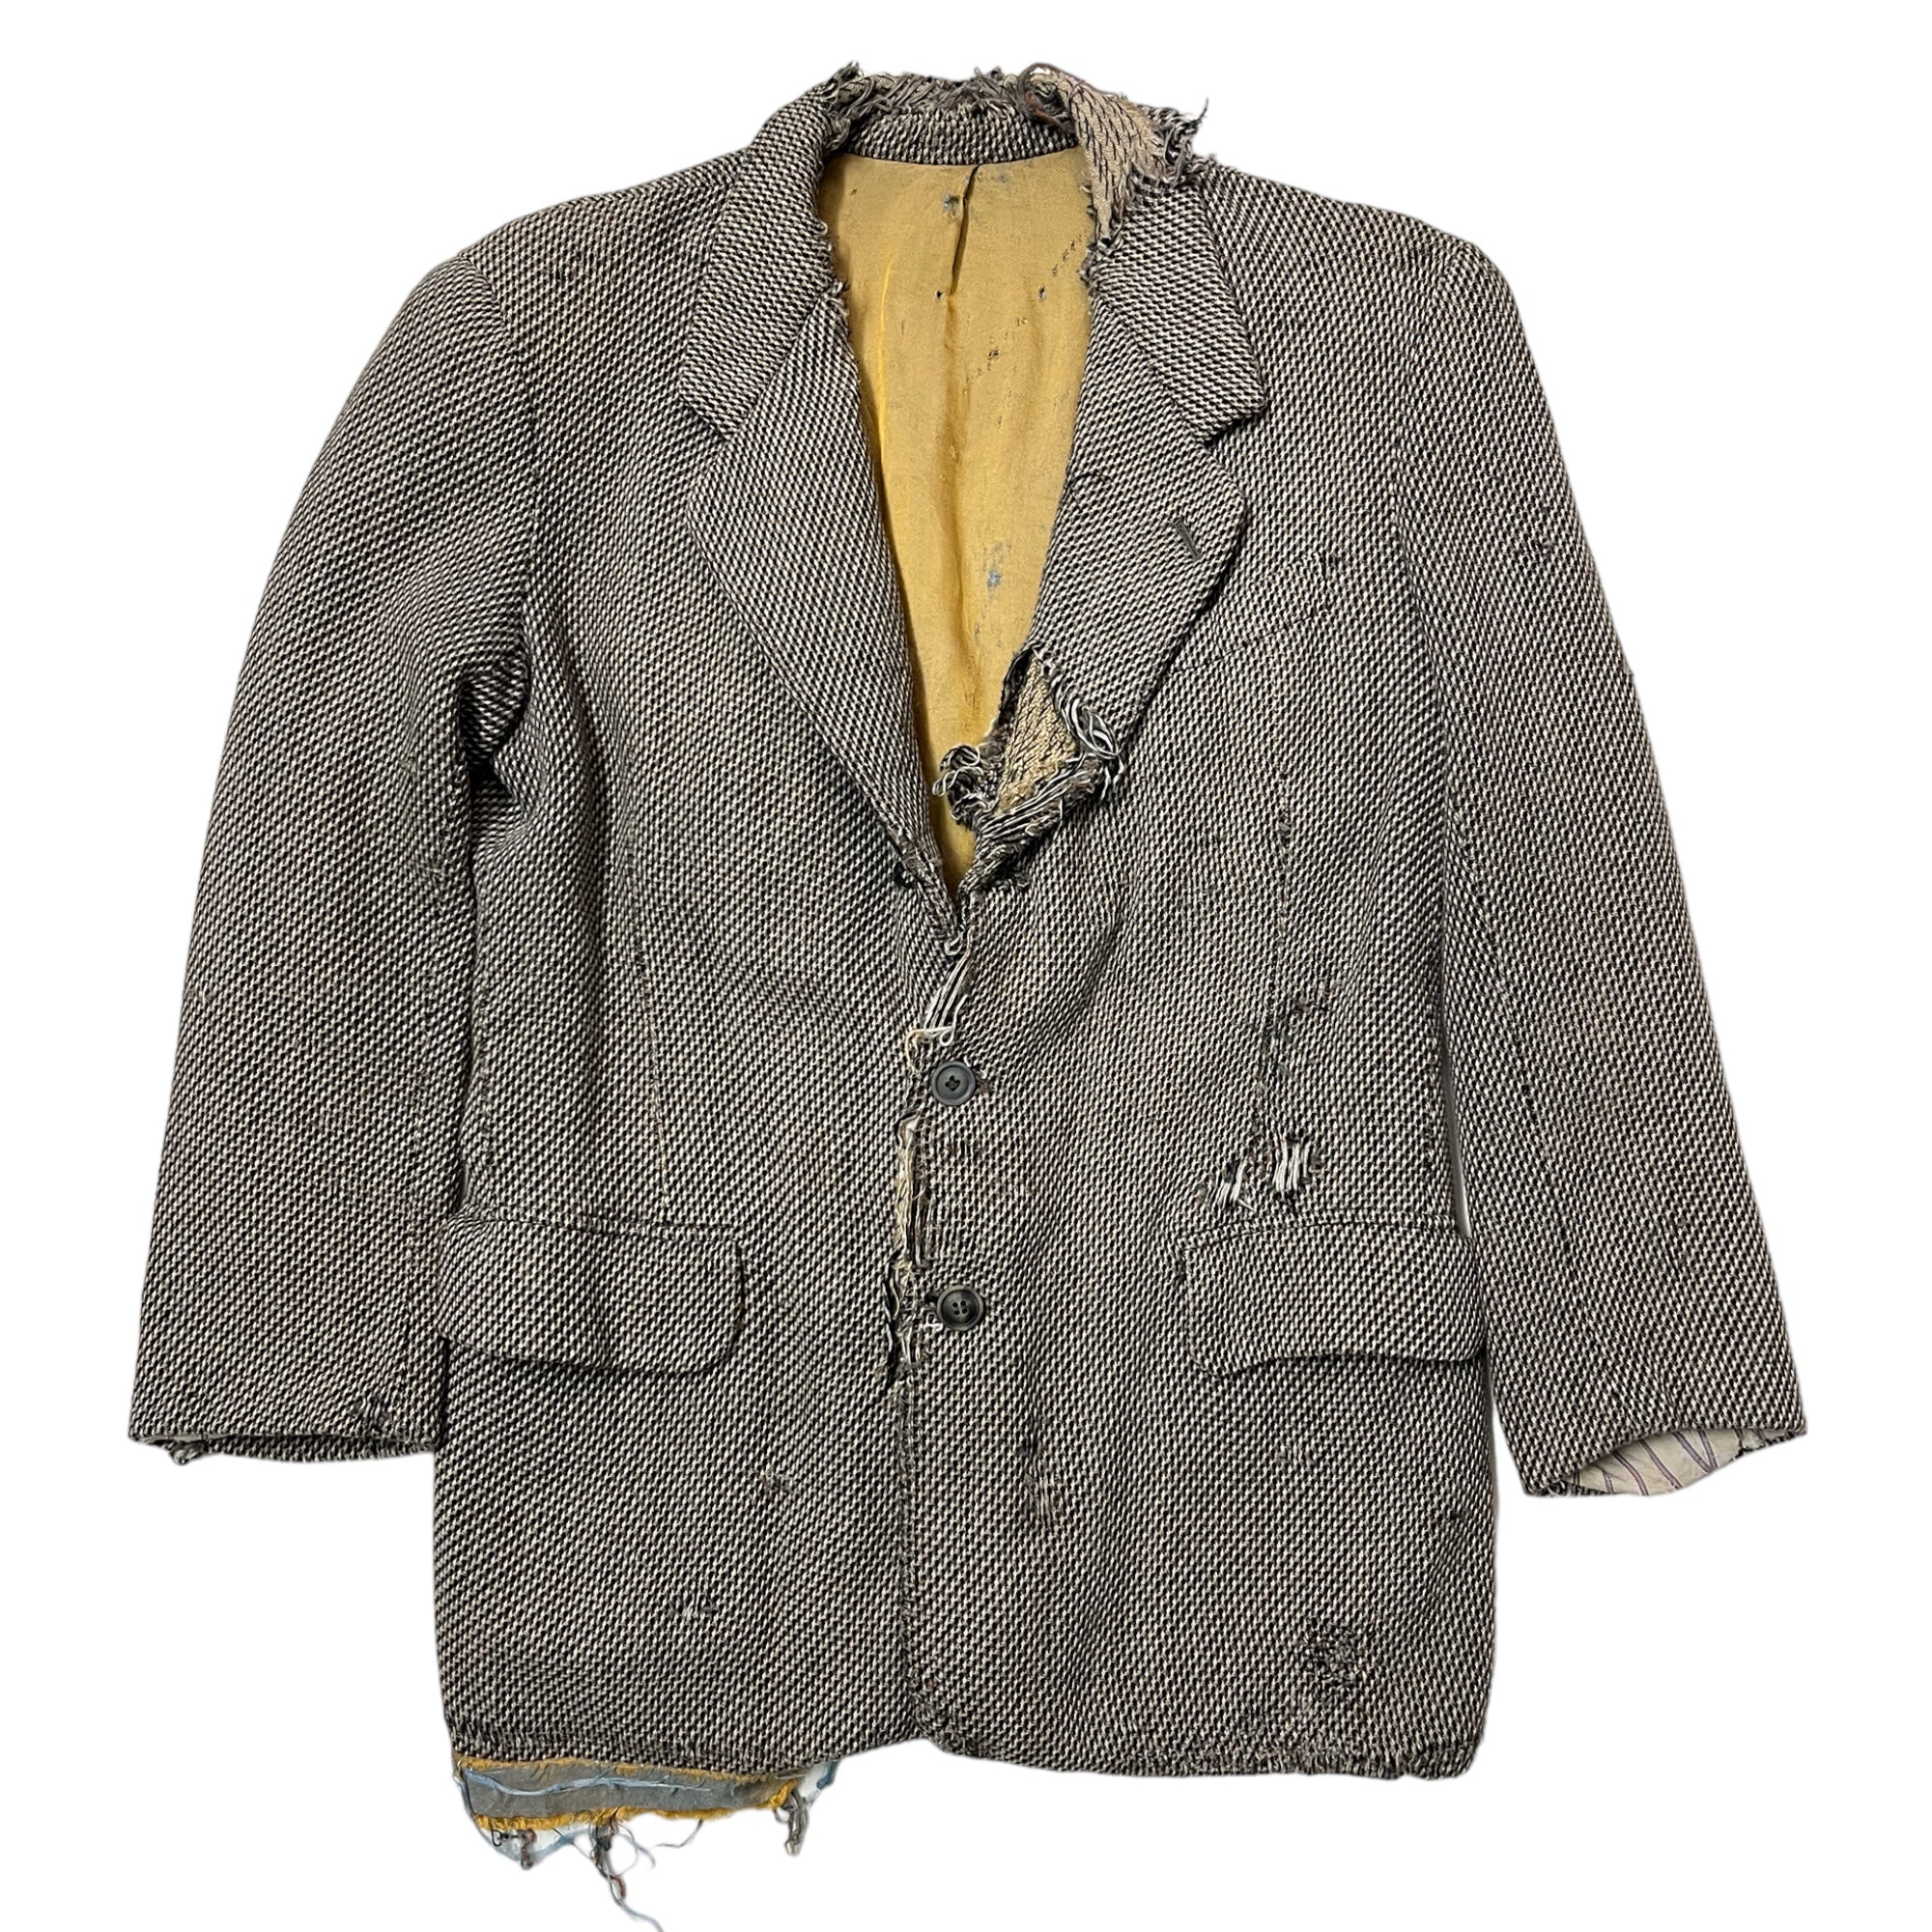 1920s Distressed French Tweed ‘Peasant’ Jacket - Tan/Brown/Gold - XS/S